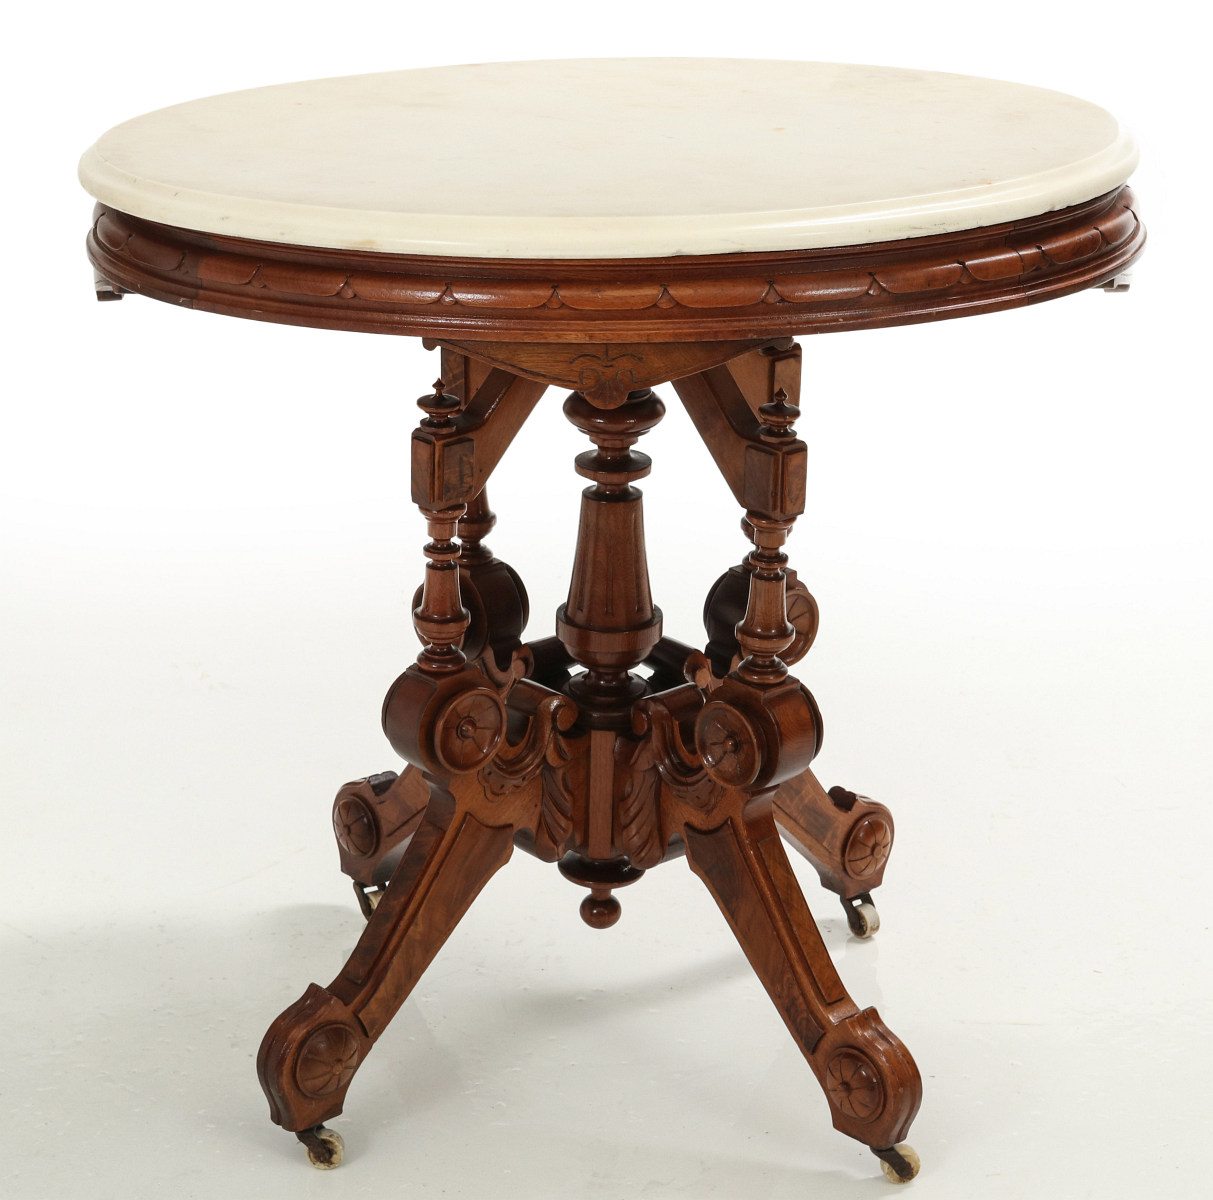 A GOOD 19TH CENT AMERICAN WALNUT MARBLE TOP TABLE